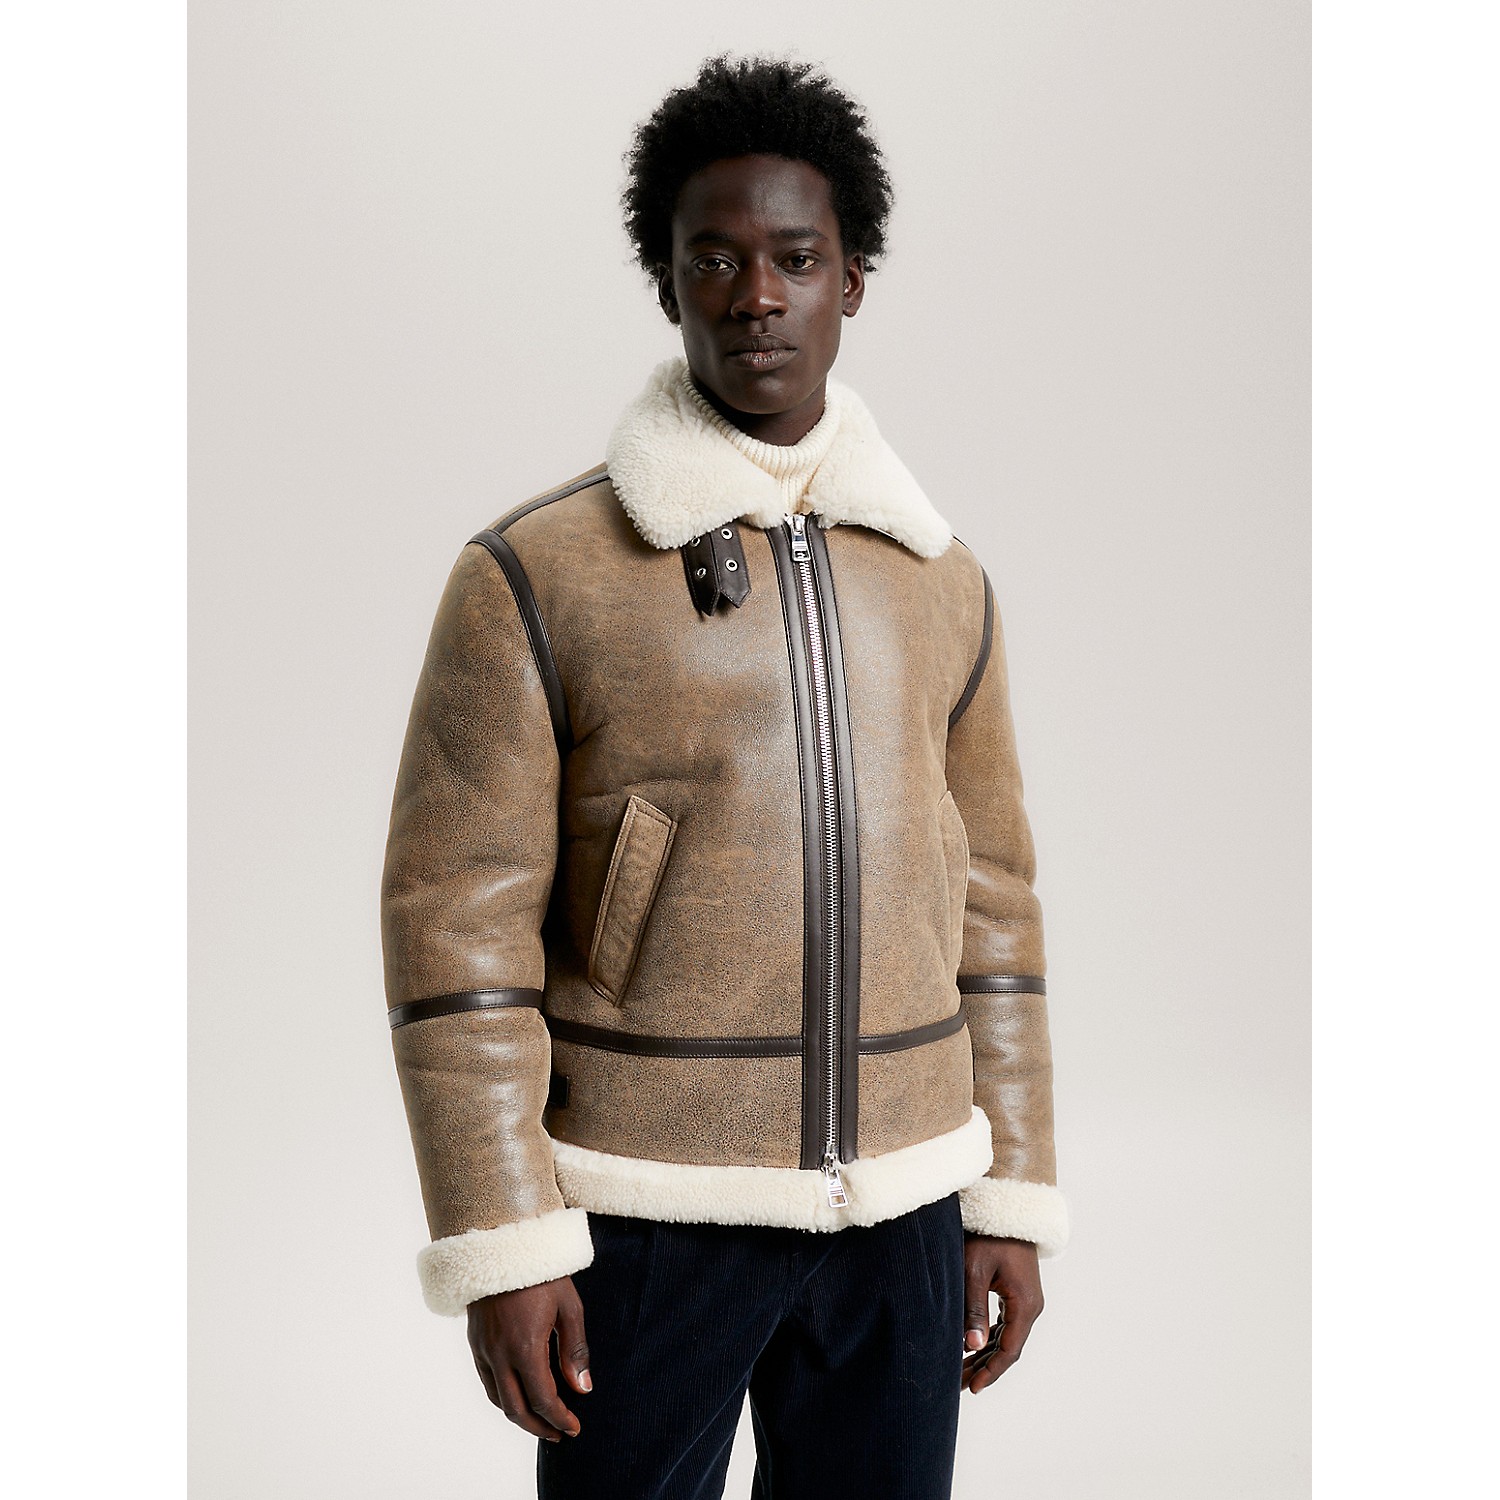 TOMMY HILFIGER Shearling-Lined Leather Jacket